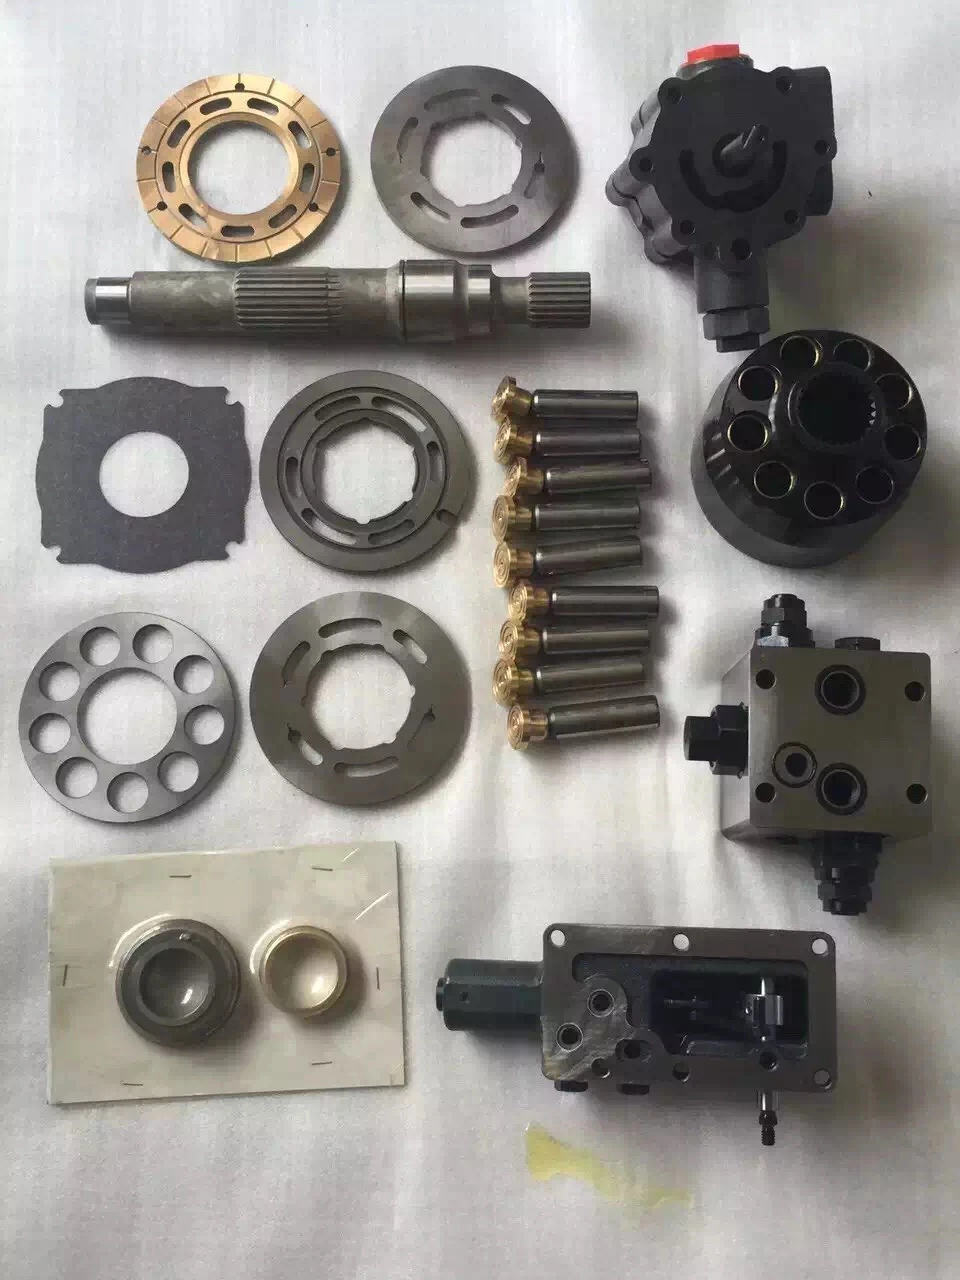 Rexroth A4vso-A10vso-A2fo Hydraulic Pump Spars Parts Engine Cylinder Block, Piston, Valve Plate, Swash Plate, Shaft, Seal Kit, Spring, Motor Spare Parts